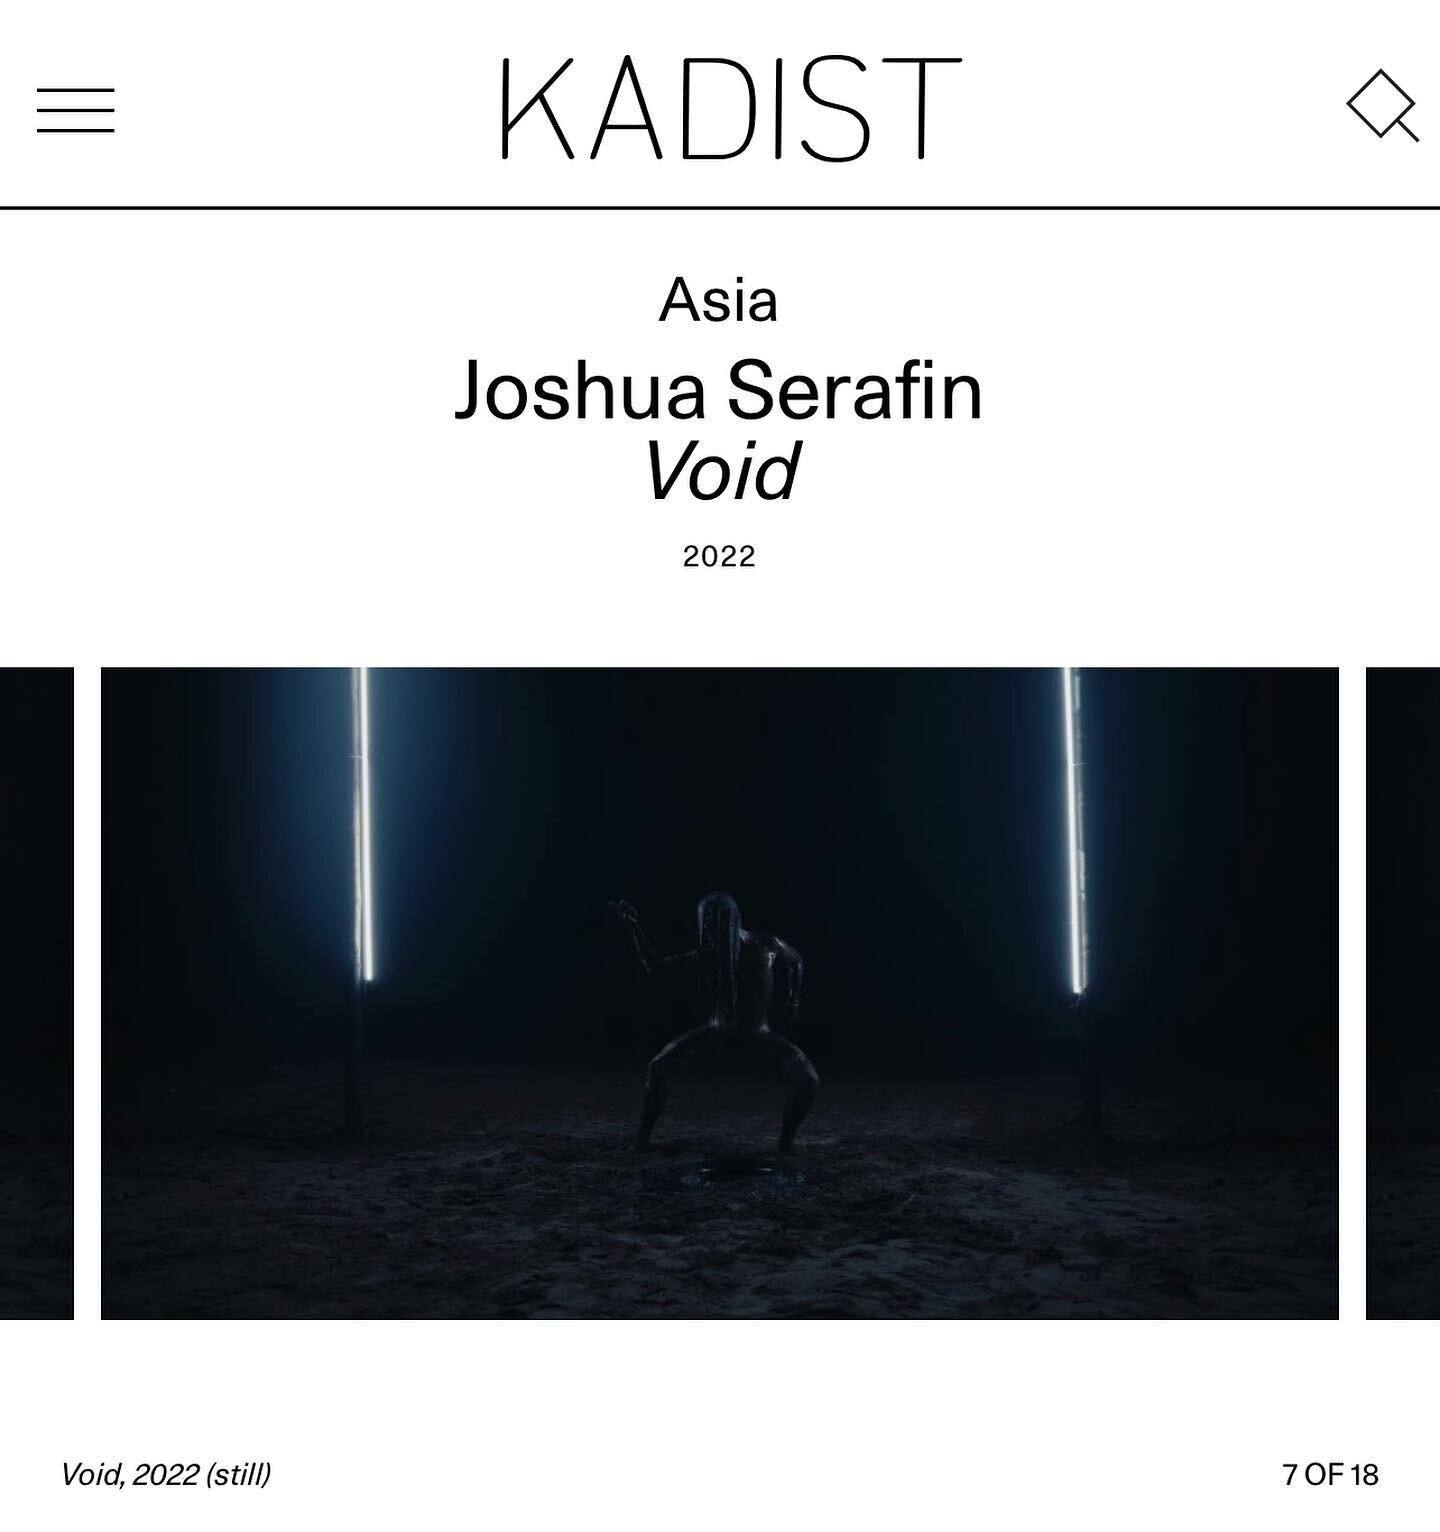 Dearest Im happy to announce that @kadistkadist acquired the video work &ldquo;VOID&rdquo; as part of their collection early this year. Im beyond grateful for the work, especially in the presence of other amazing works by other artists.
If you want t